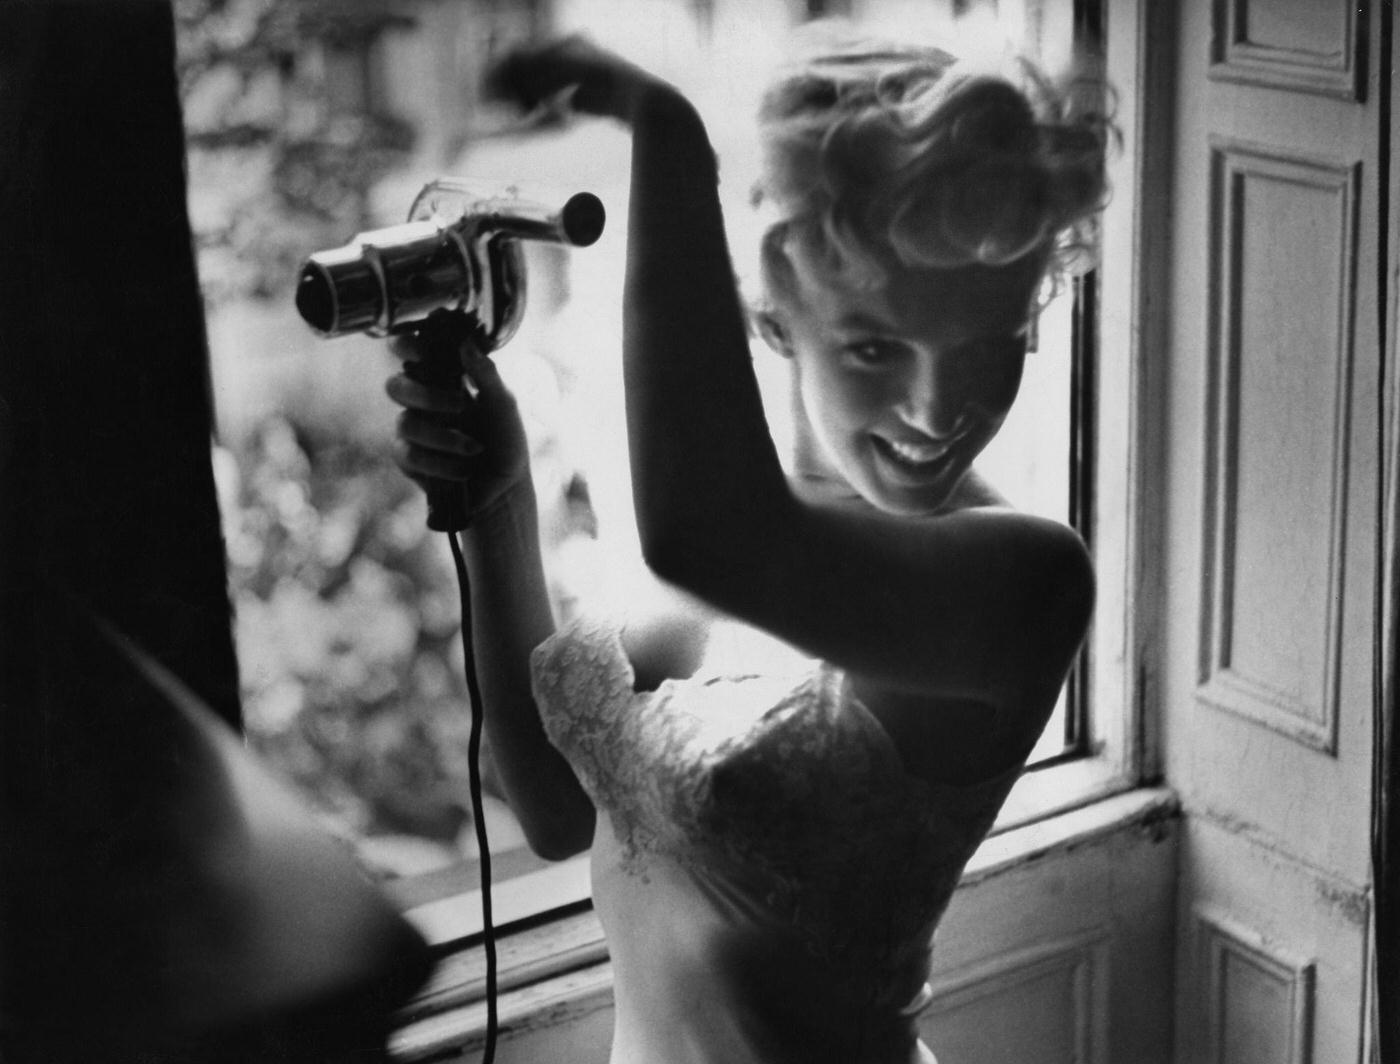 Marilyn Monroe blow-dries her hair in front of an open window in 1954 during the filming of "The Seven Year Itch" in New York